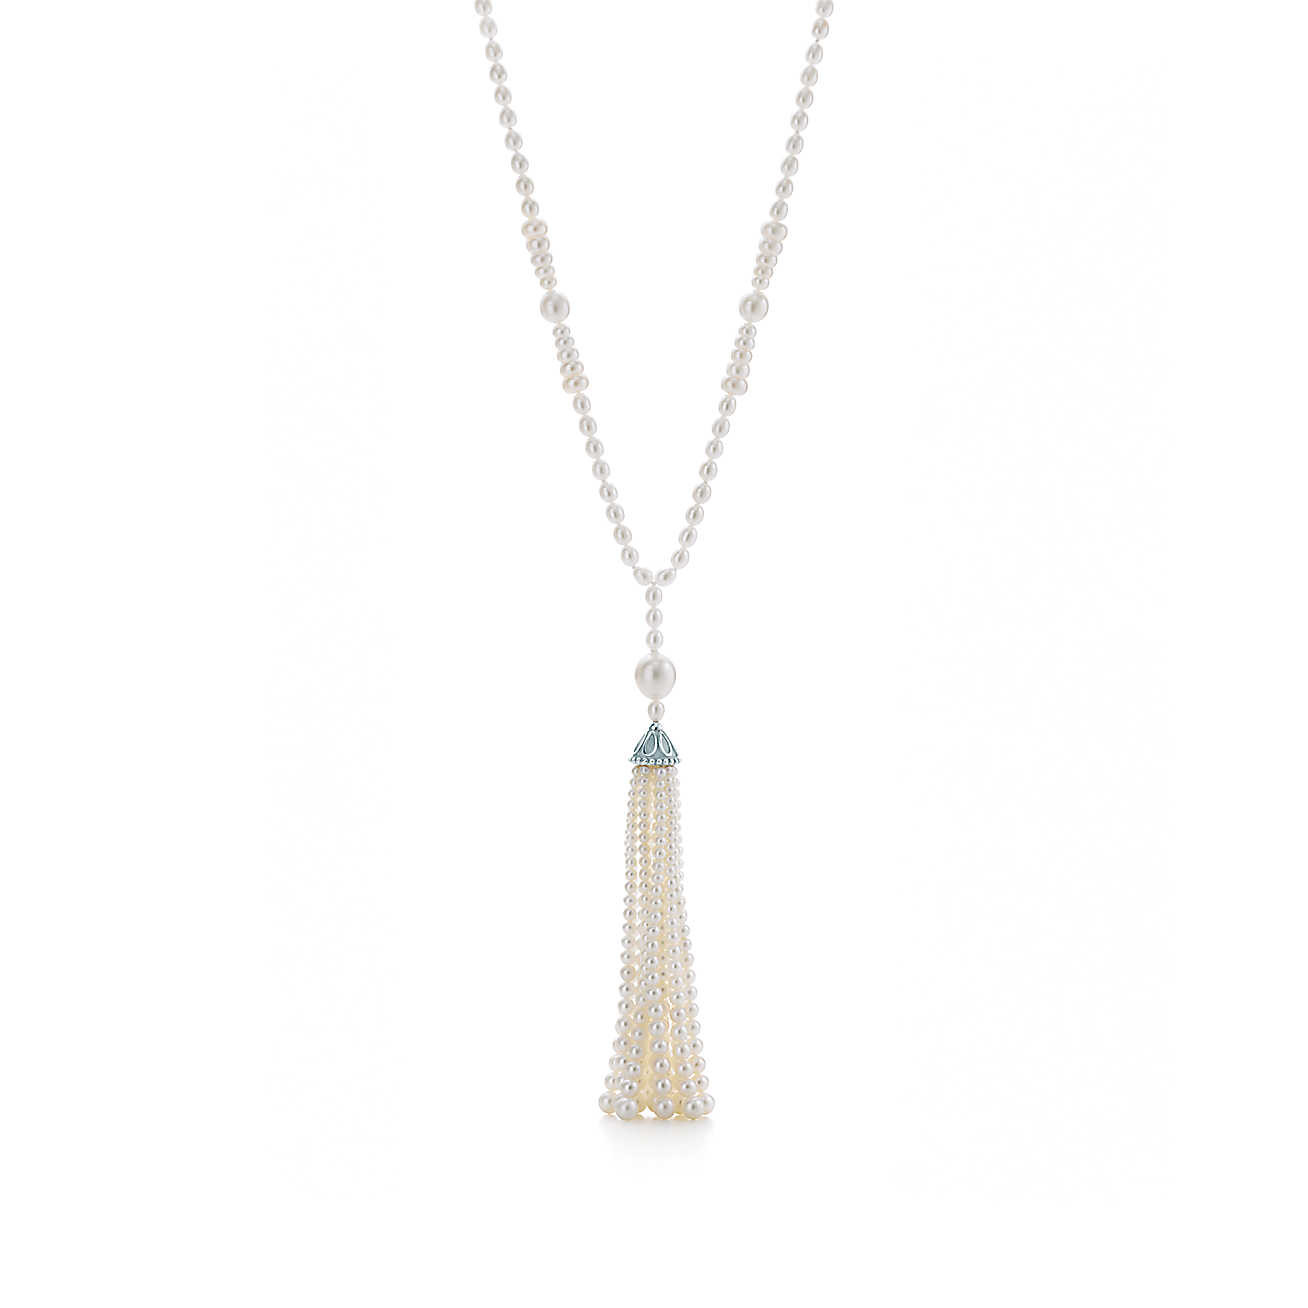 Pearl Tassel Necklace
 Ziegfeld Collection pearl tassel necklace in sterling